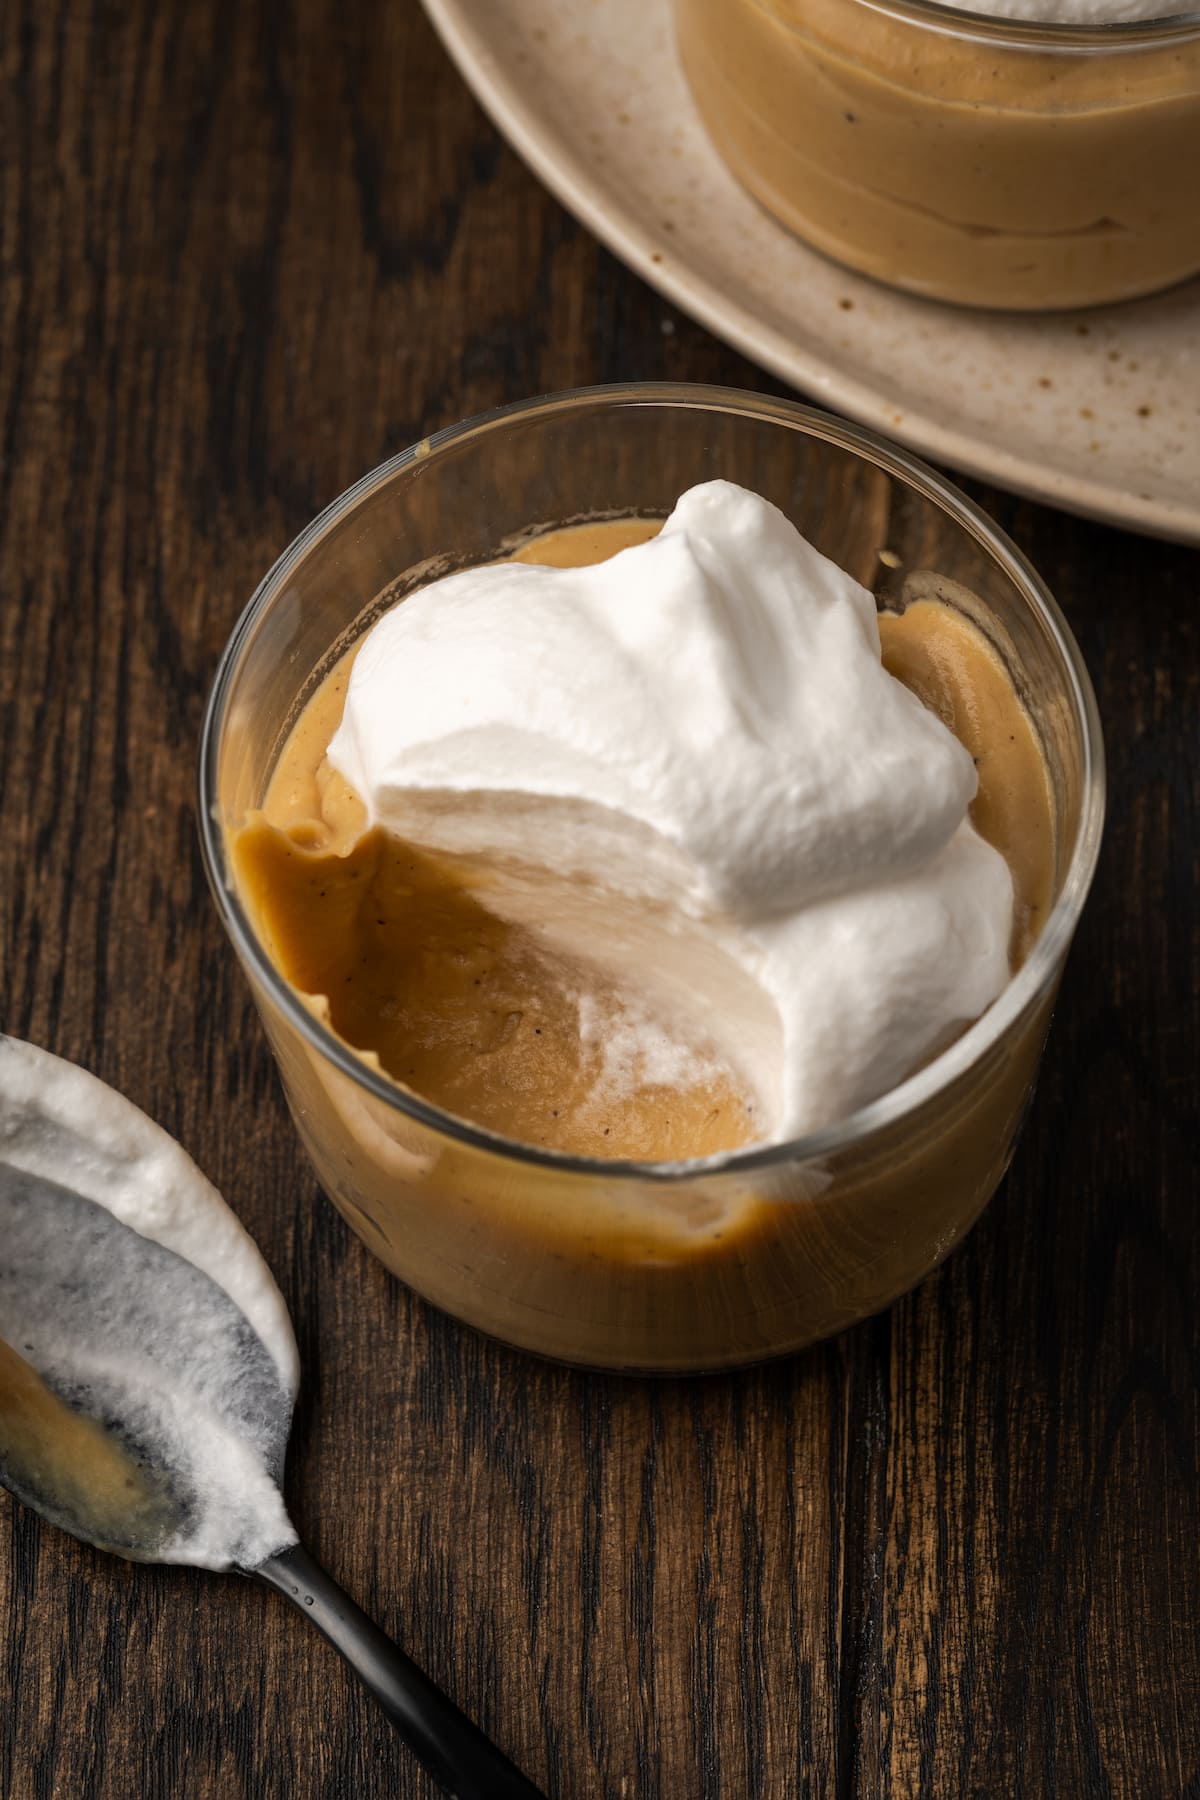 Butterscotch pudding topped with whipped cream in a glass, with a spoonful missing.